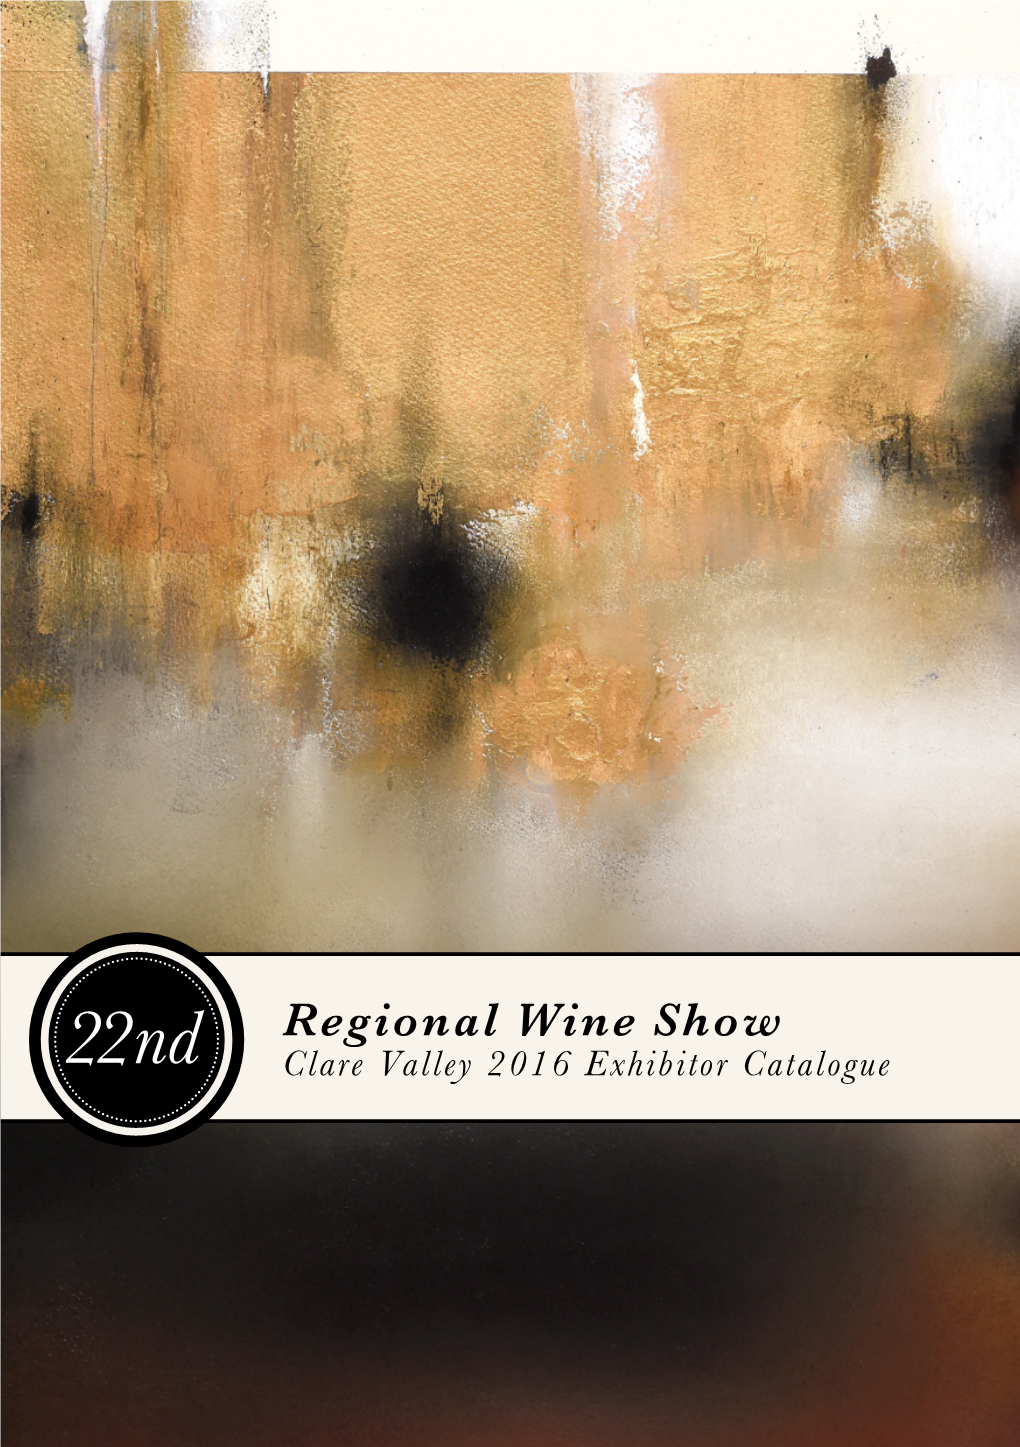 Regional Wine Show 22Nd Clare Valley 2016 Exhibitor Catalogue Sponsors of the Clare Valley Regional Wine Show 2016